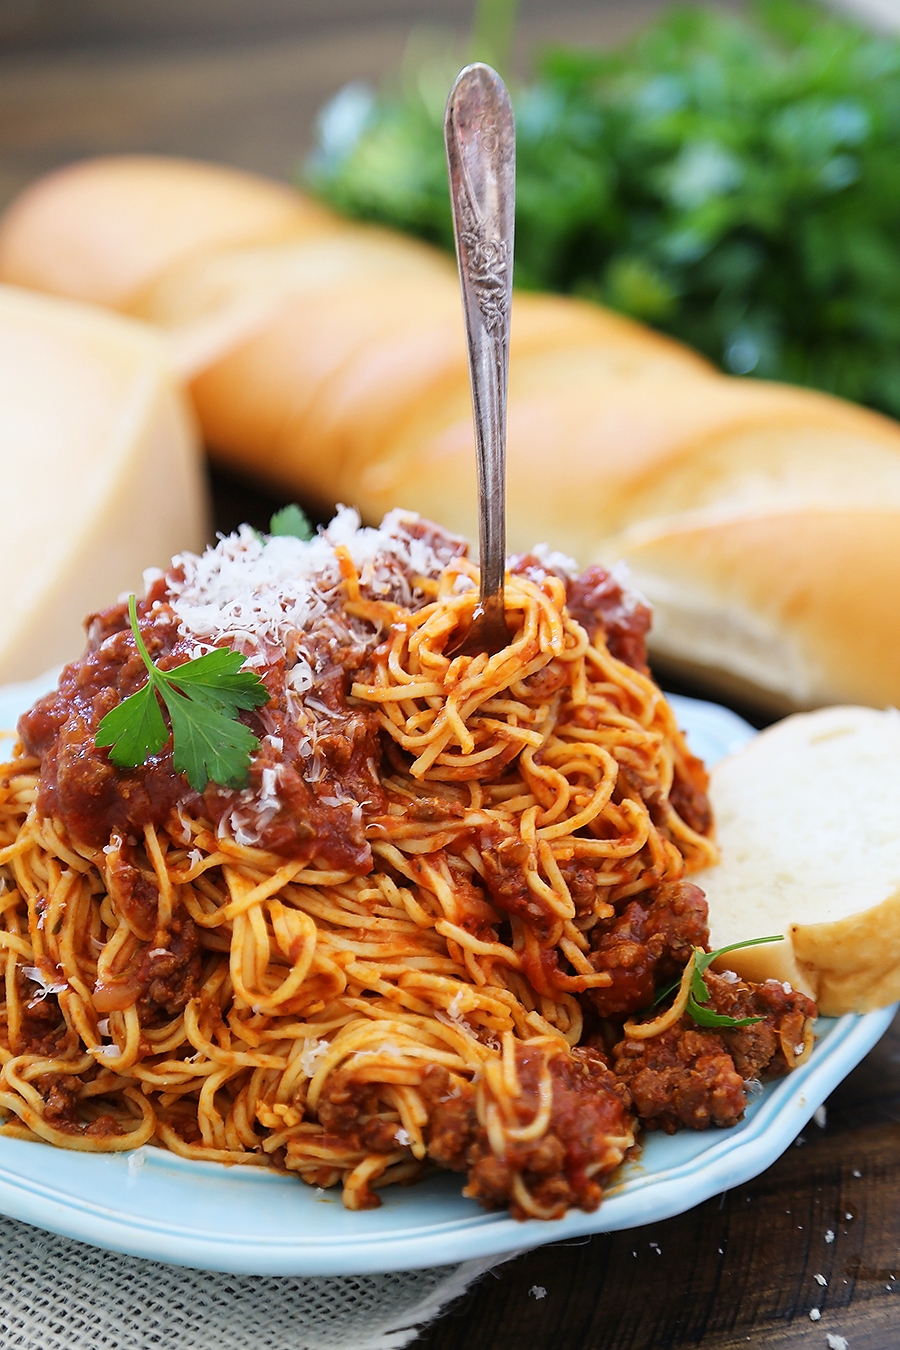 Spaghetti Bolognese Slow Cooker - A rich and classic Italian pasta sauce easy to make in your slow cooker! Freeze for later or dig with a bowl of hot spaghetti! thecomfortofcooking.com